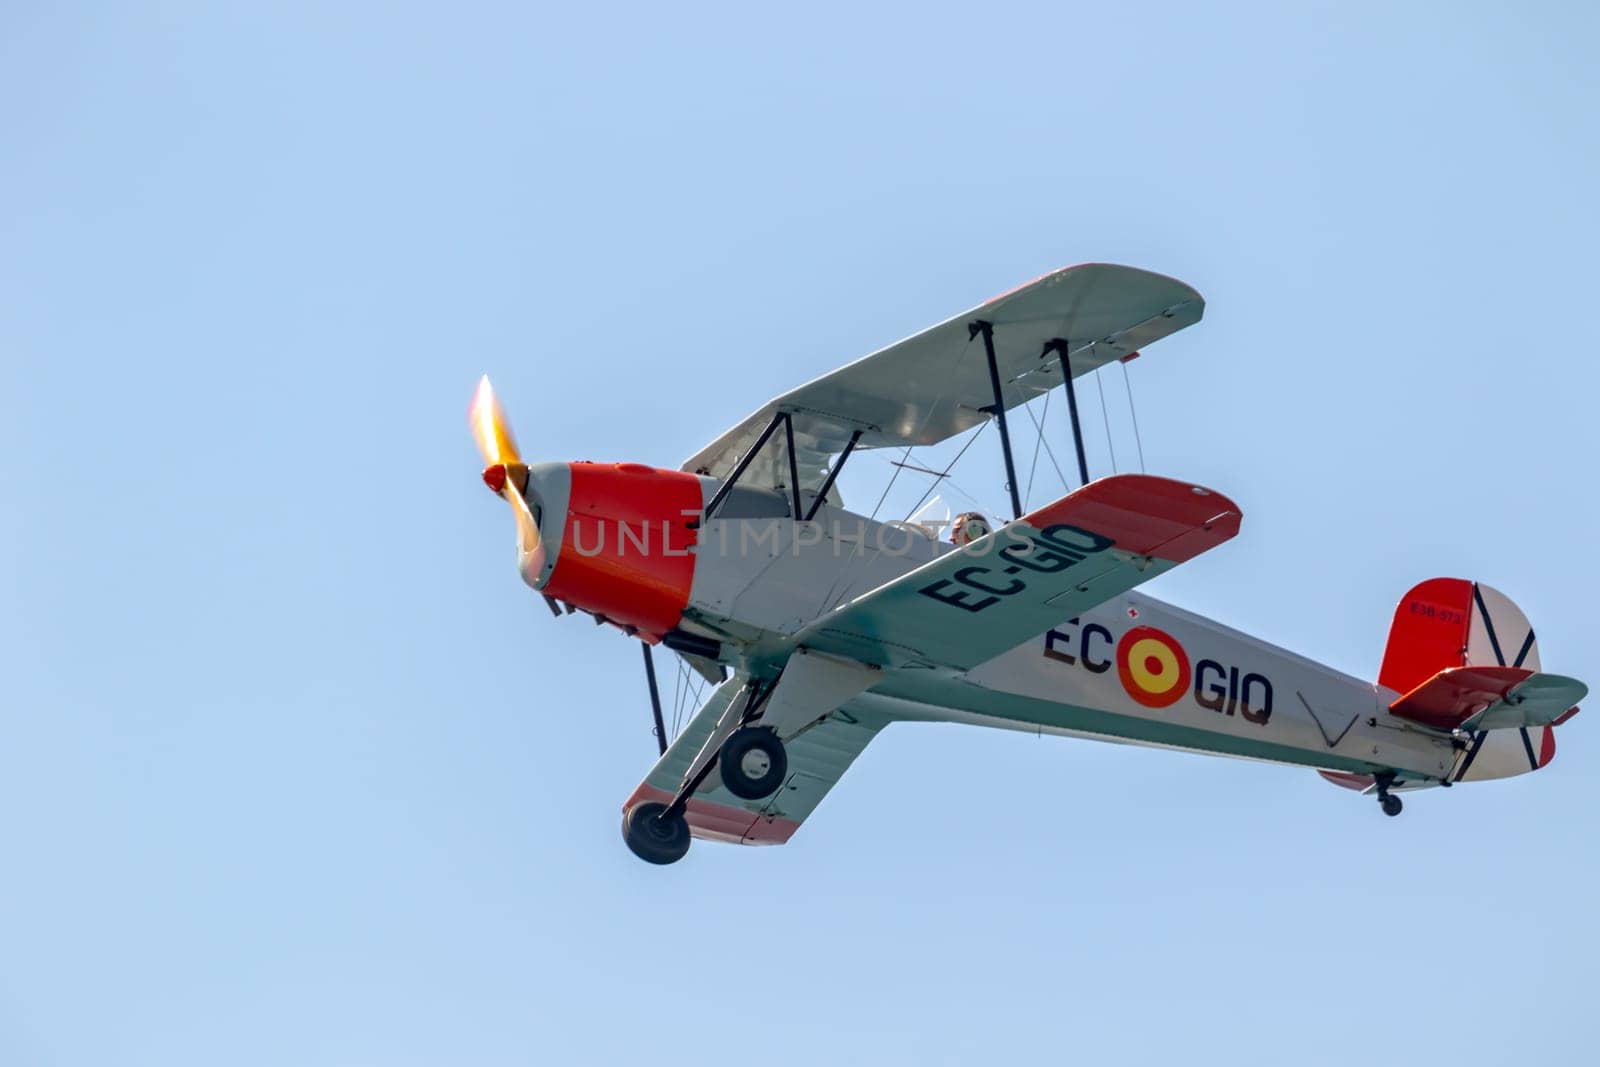 TORRE DEL MAR, MALAGA, SPAIN-JUL 30: Airplane CASA Bucker 1.131E Jungmann taking part in a exhibition on the 2nd airshow of Torre del Mar on July 30, 2017, in Torre del Mar, Malaga, Spain